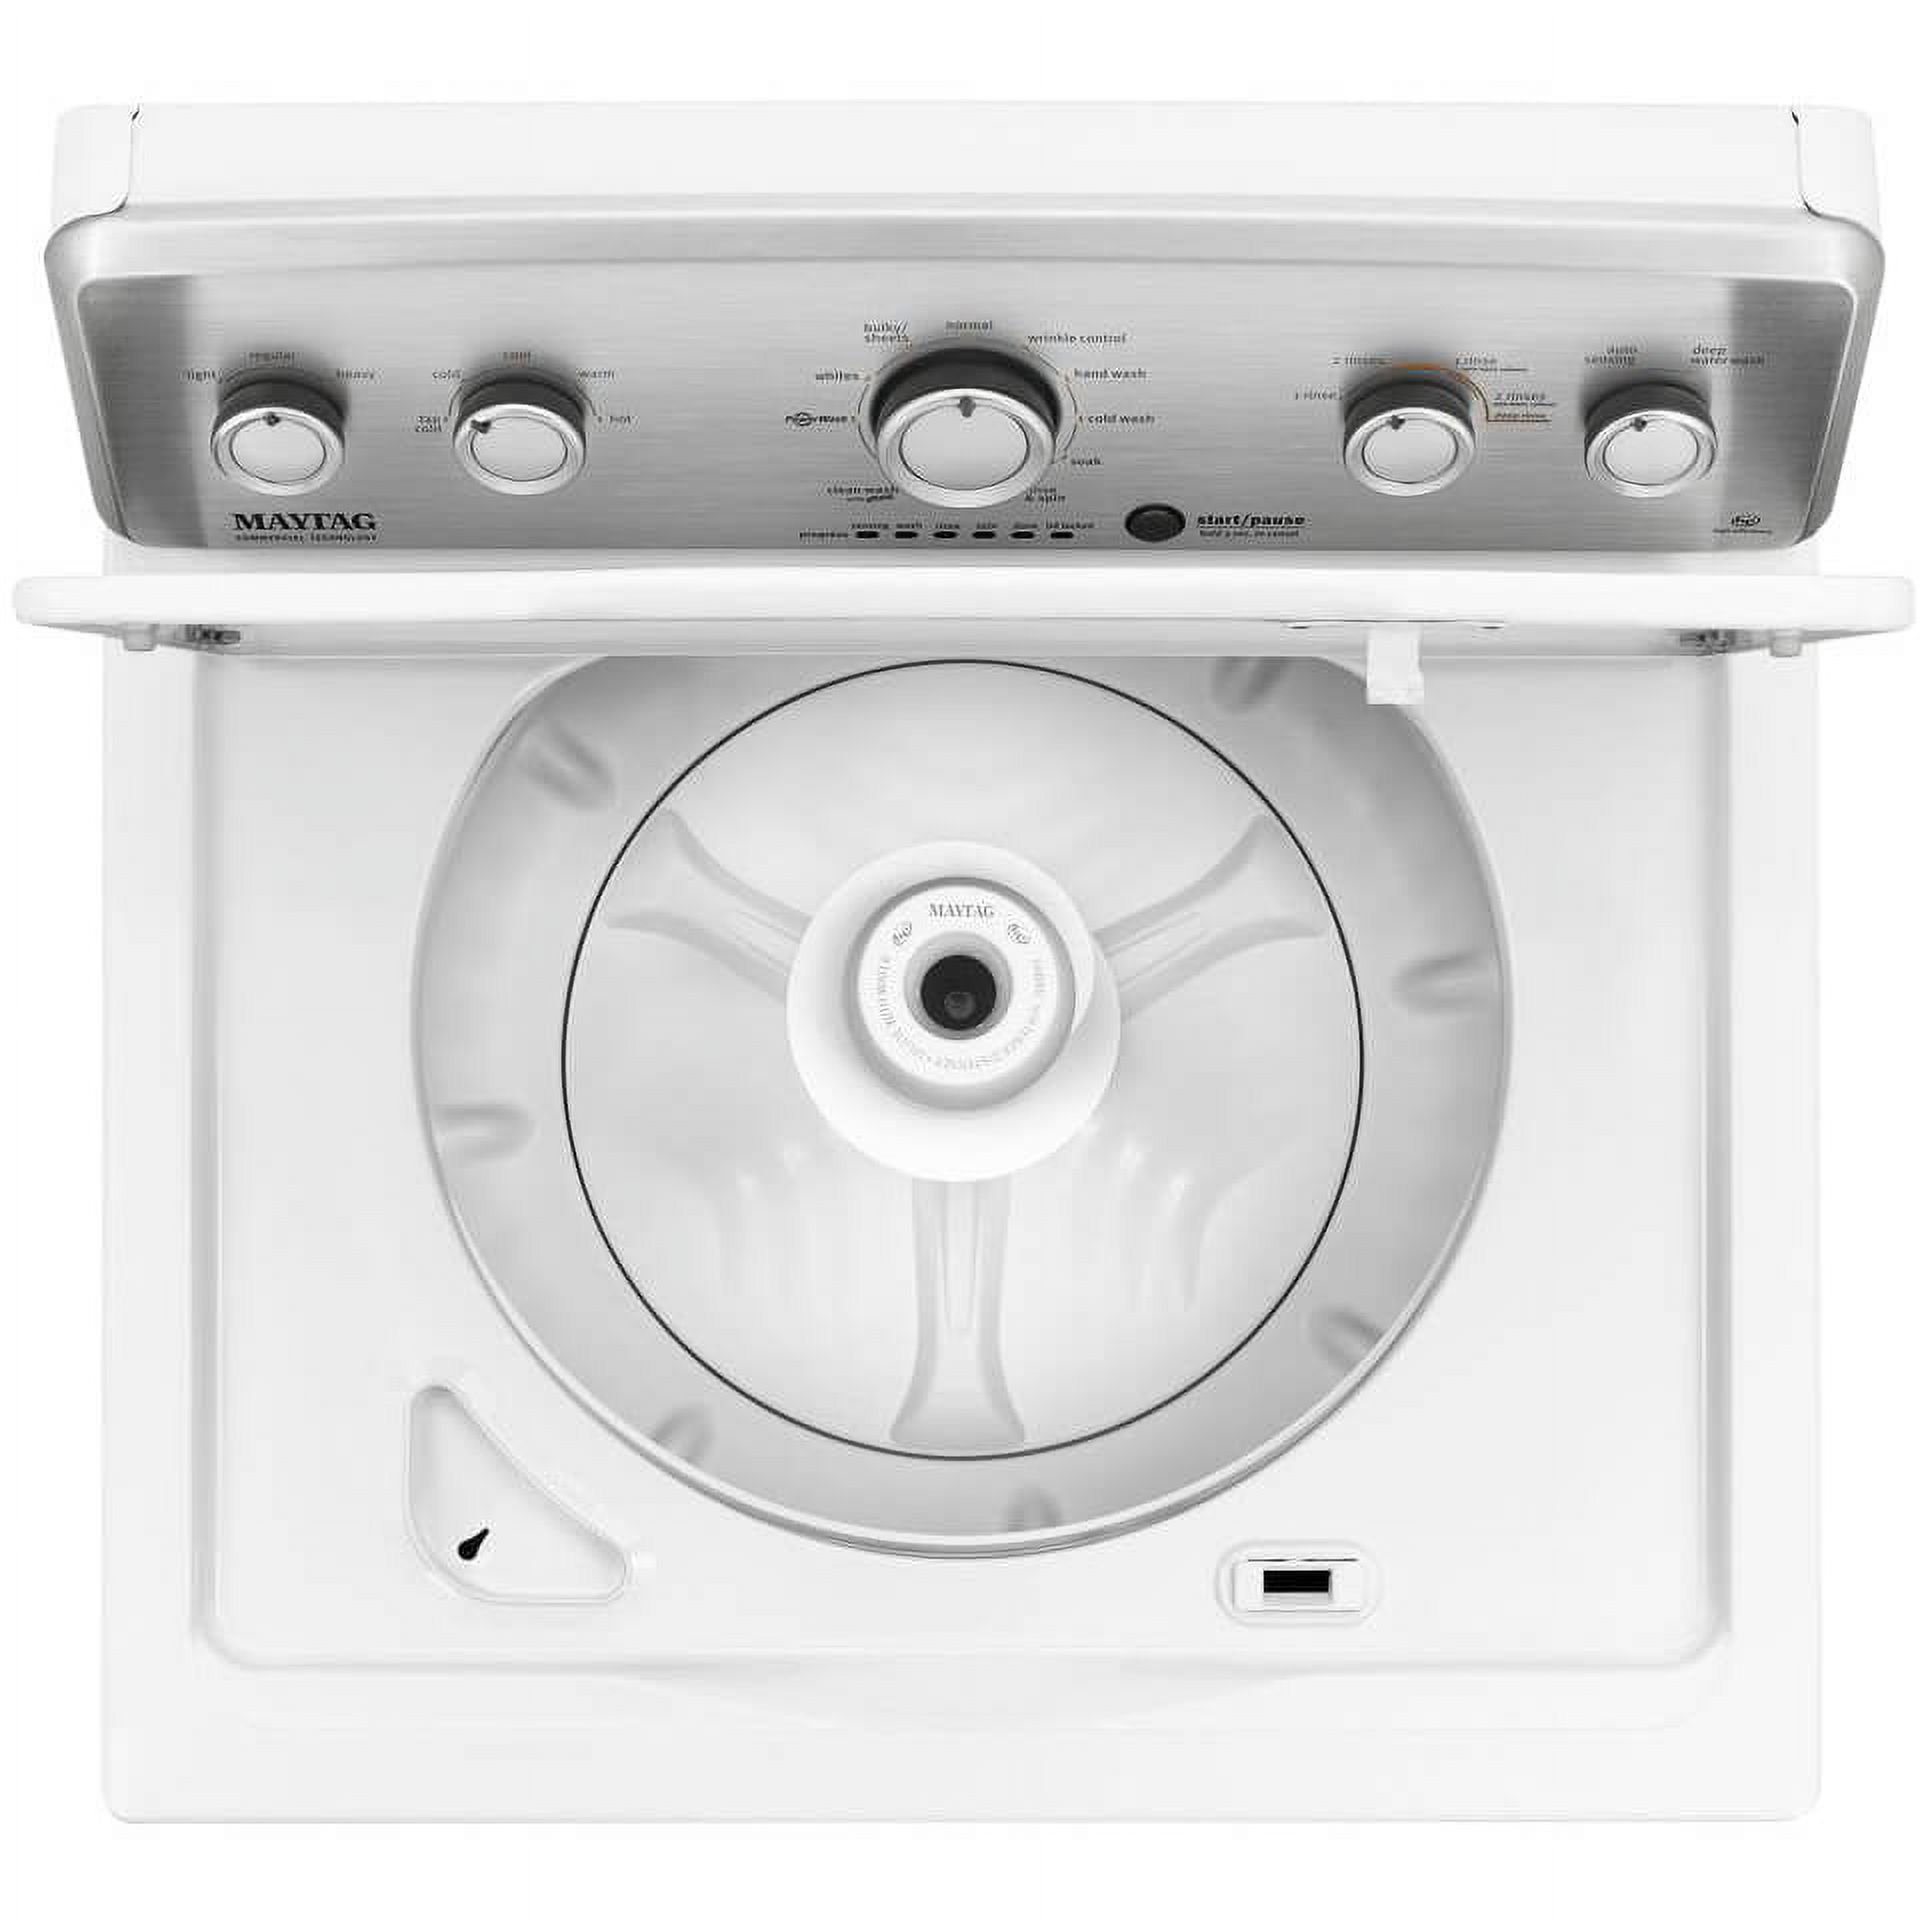 Maytag MVWC565FW 4.2 Cu. Ft. White Top Load Washer - image 3 of 3